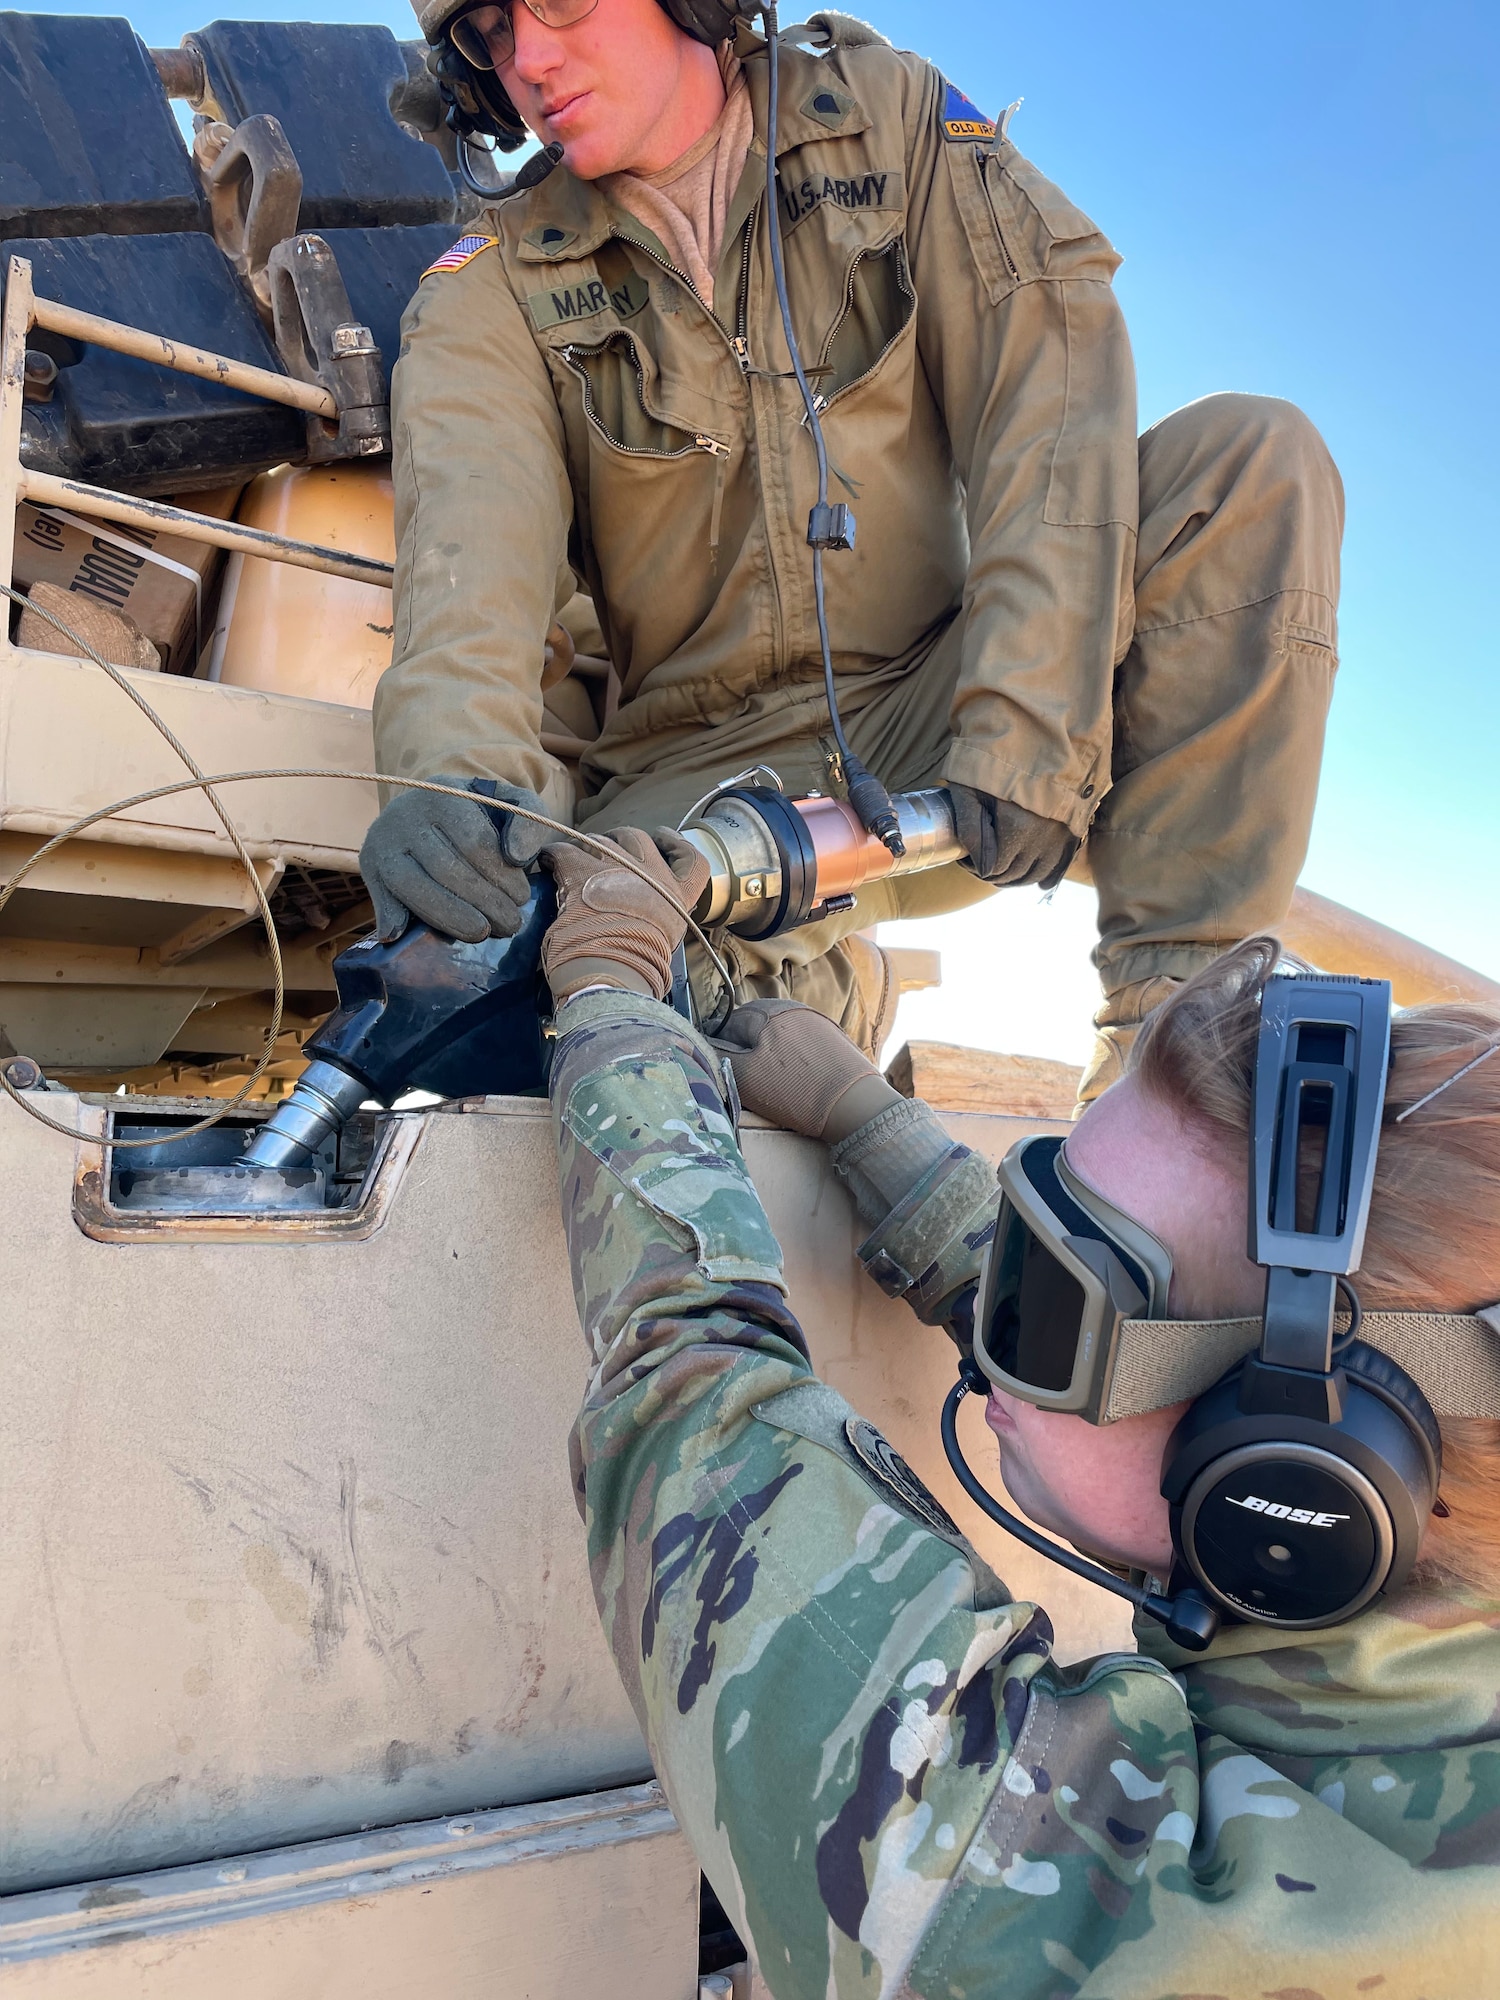 U.S. Army soldiers assigned to the 1st Armored Division connect a fuel hose to an M1A2 Abrams Tank at Fort Bliss, Texas, Jan. 25, 2023. The 317 Airlift Wing executed an Agile Combat Employment exercise by sending a C-130 to the Fort Bliss Range to perform Specialized Fueling Operations with the 3rd Brigade Combat Team, 1st AD and the 1st Battalion, 77th Armored Regiment. The units successfully passed fuel from a C-130 to an M1A2 Abrams Tank utilizing an Emergency Response Refueling Equipment Kit, marking the first time in Air Force history that a C-130 has been used to refuel an Abrams tank. (Courtesy photo)